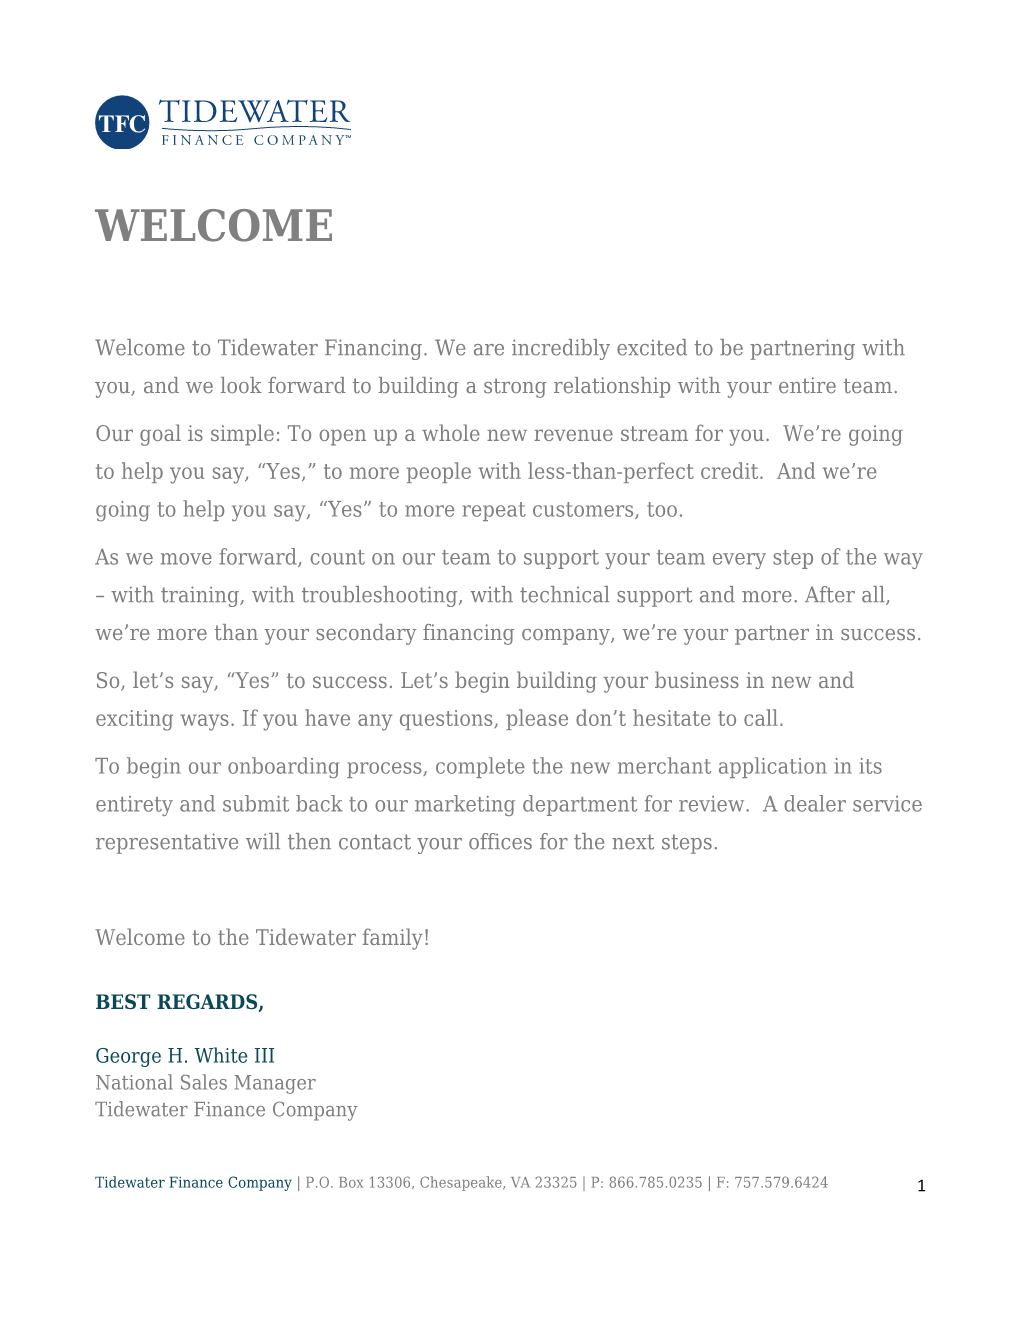 Welcome to Tidewater Financing. We Are Incredibly Excited to Be Partnering with You, And